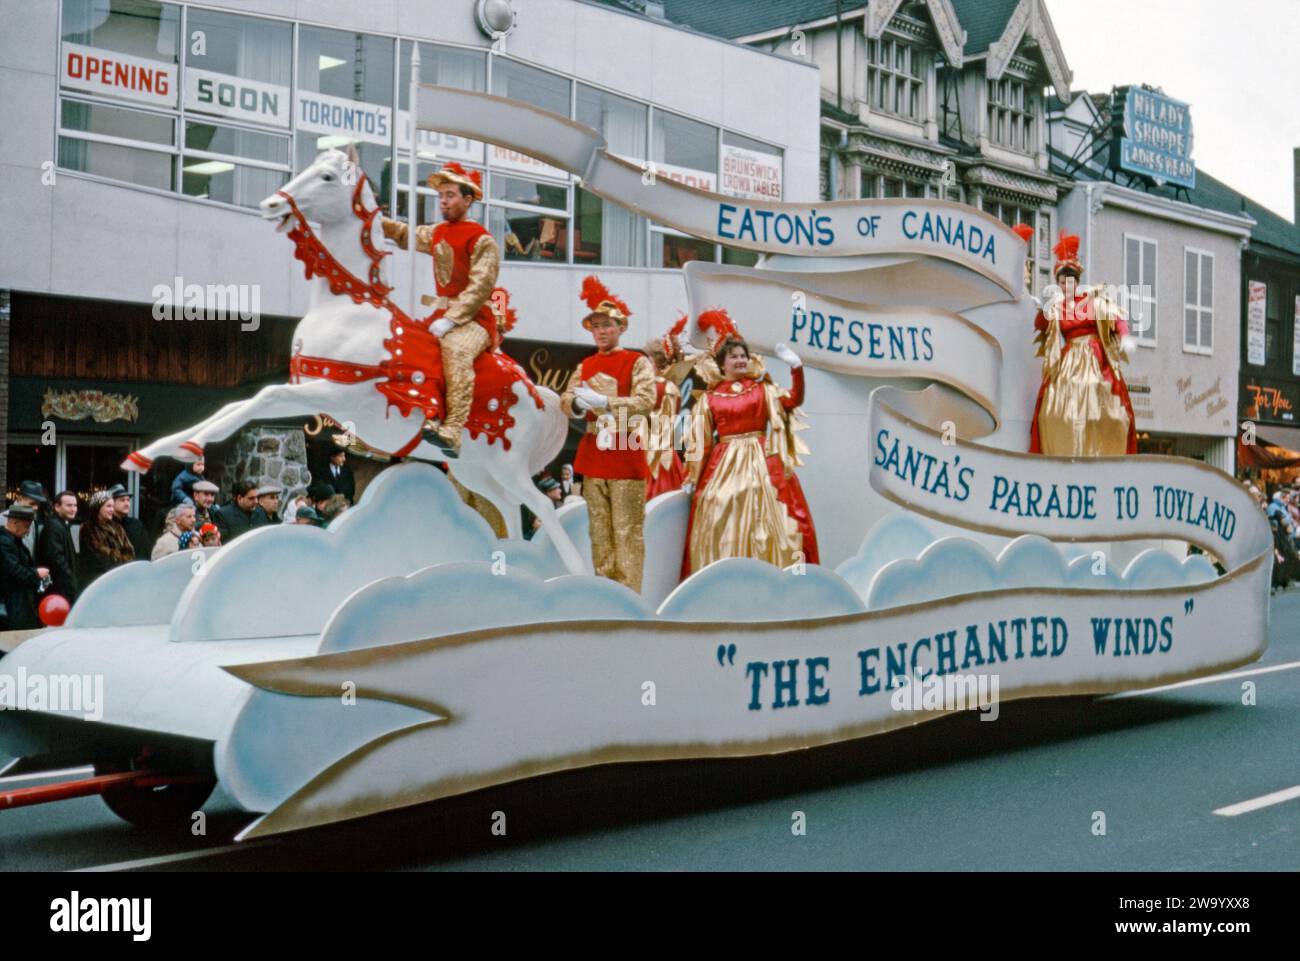 A parade float taking part in Eaton's Santa Claus Parade on Yonge Street, Toronto, Ontario, Canada, November 17, 1962. This float, ‘The Enchanted Winds’, promotes Eaton’s department stores with colourful costumes and a horse and rider up in the ‘clouds’. Attracting large crowds, the annual Toronto Santa Claus Parade (also known as The Original Santa Claus Parade) was first held in 1905 and is one of the largest in North America and the oldest Santa Claus parade in the world. It used to terminate at the downtown Eaton's store (later the Eaton Centre) at Yonge Street and Queen Street. Stock Photo